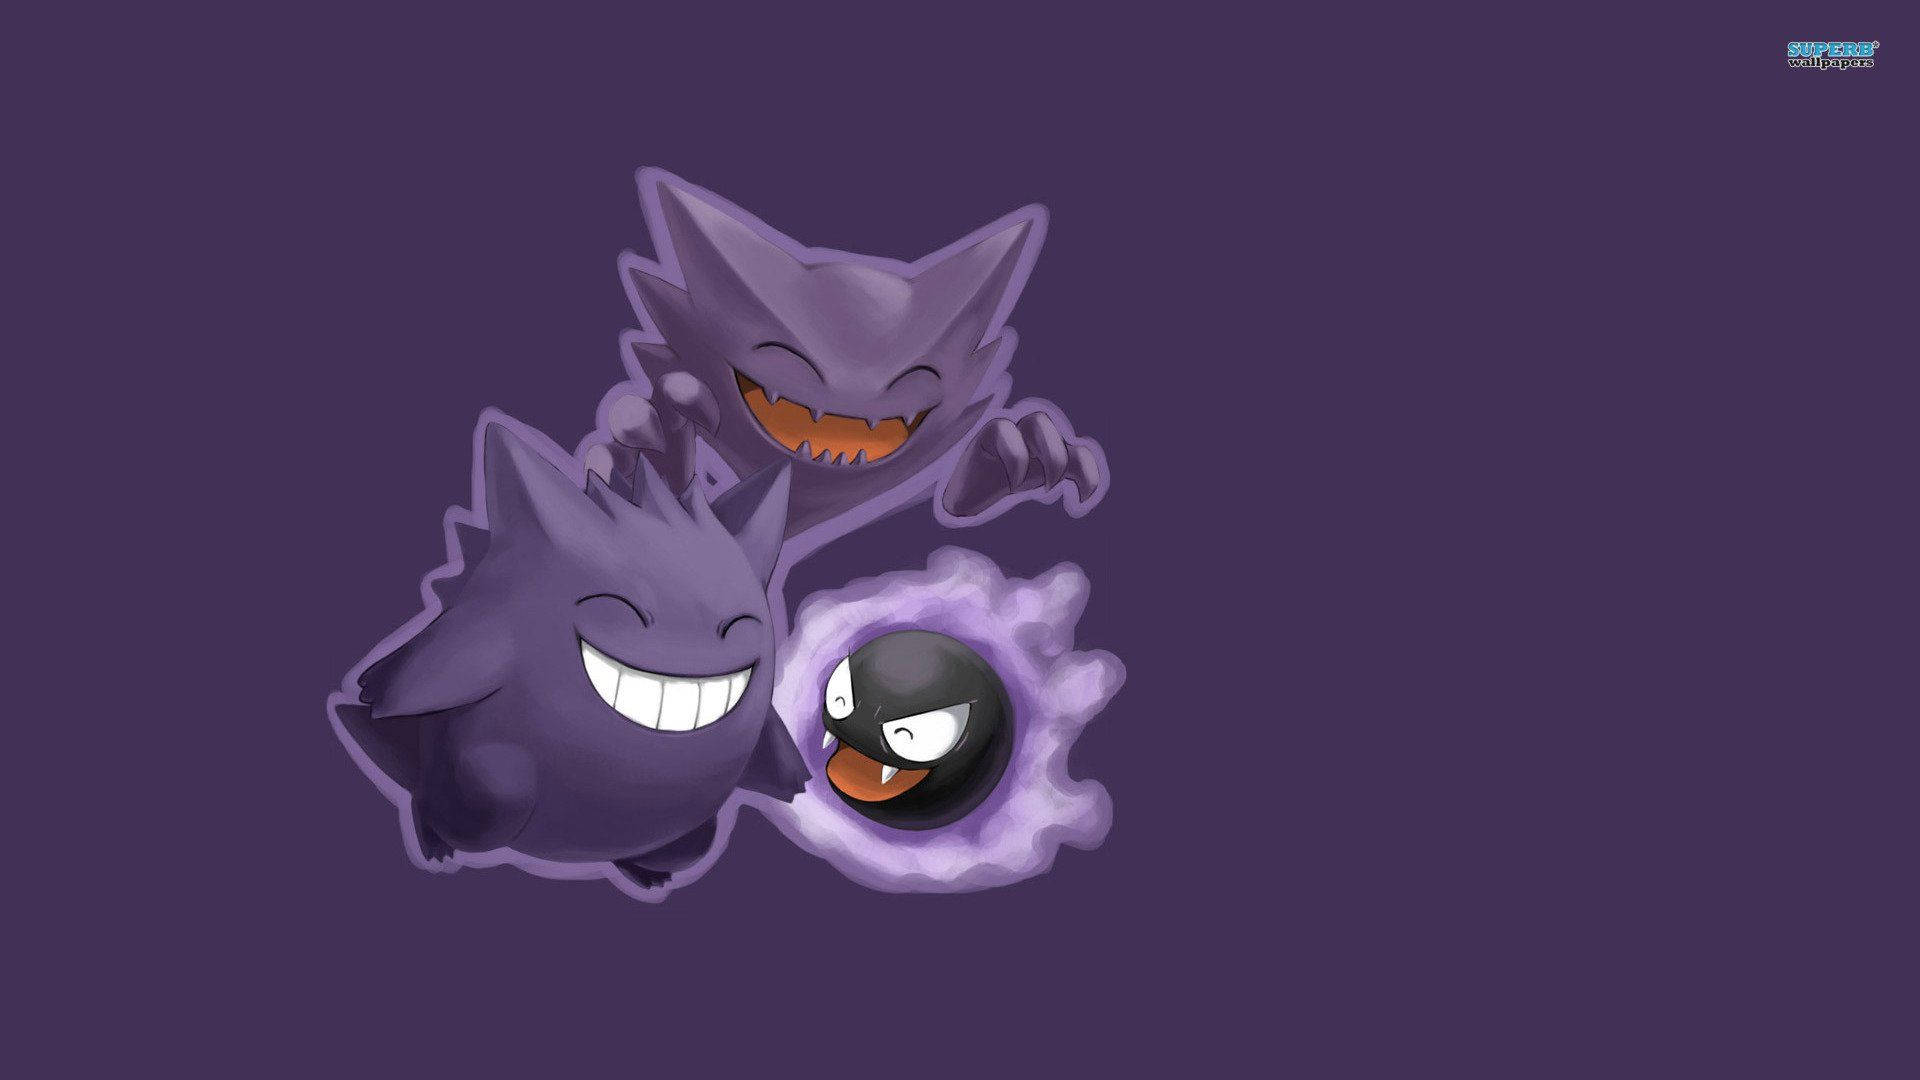 "Gengar, Haunter and Gastly, three of the most iconic Pokemon" Wallpaper